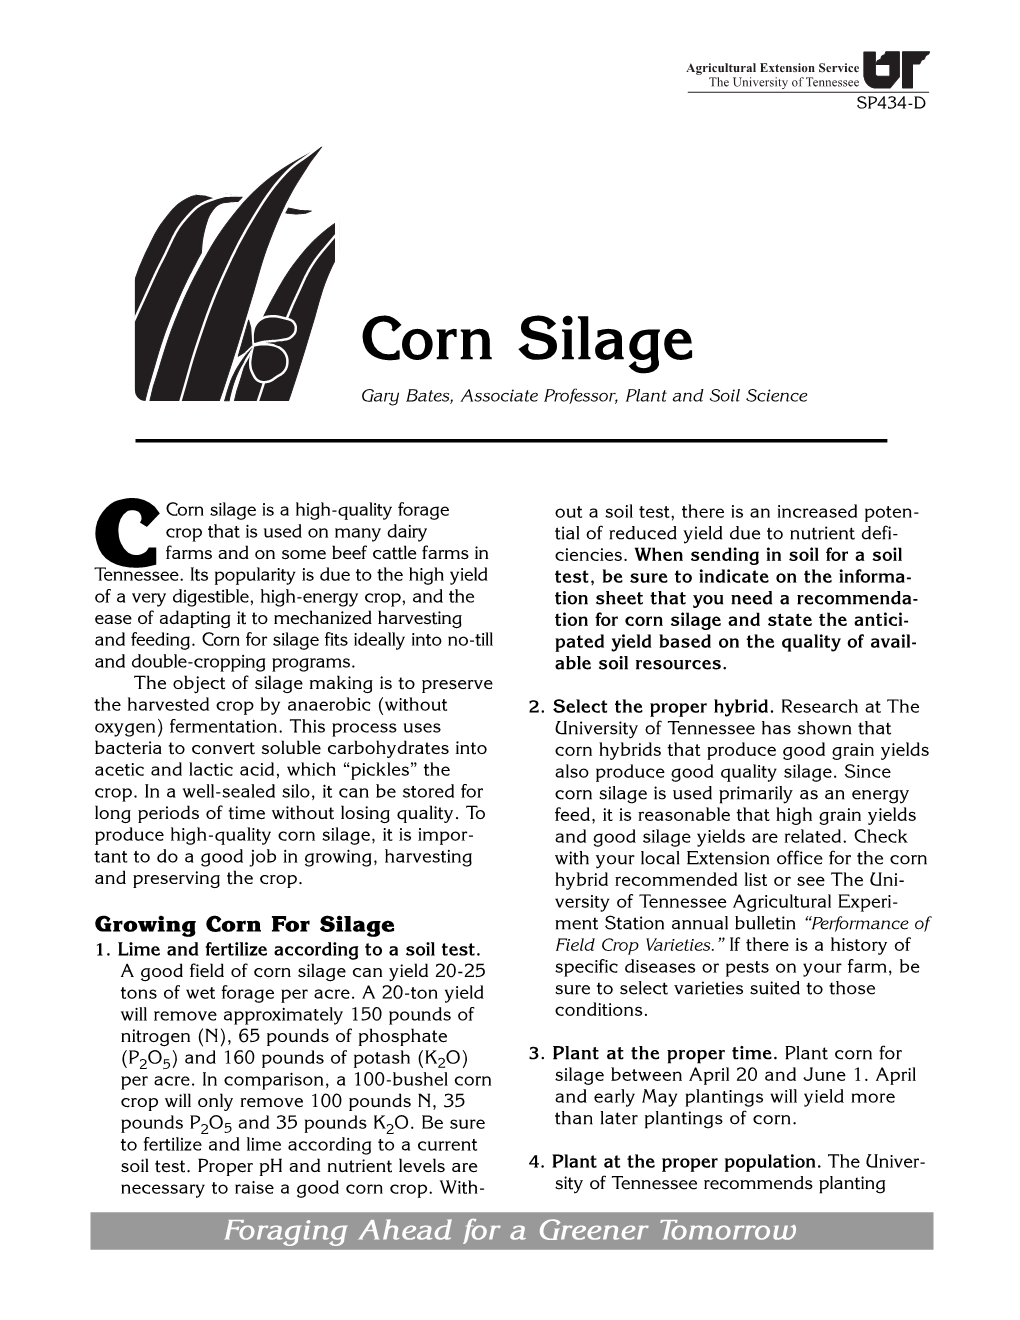 Corn Silage�Between�April�20�And�June�1.�April Crop�Will�Only�Remove�100�Pounds�N,�35 And�Early�May�Plantings�Will�Yield�More Than�Later�Plantings�Of�Corn